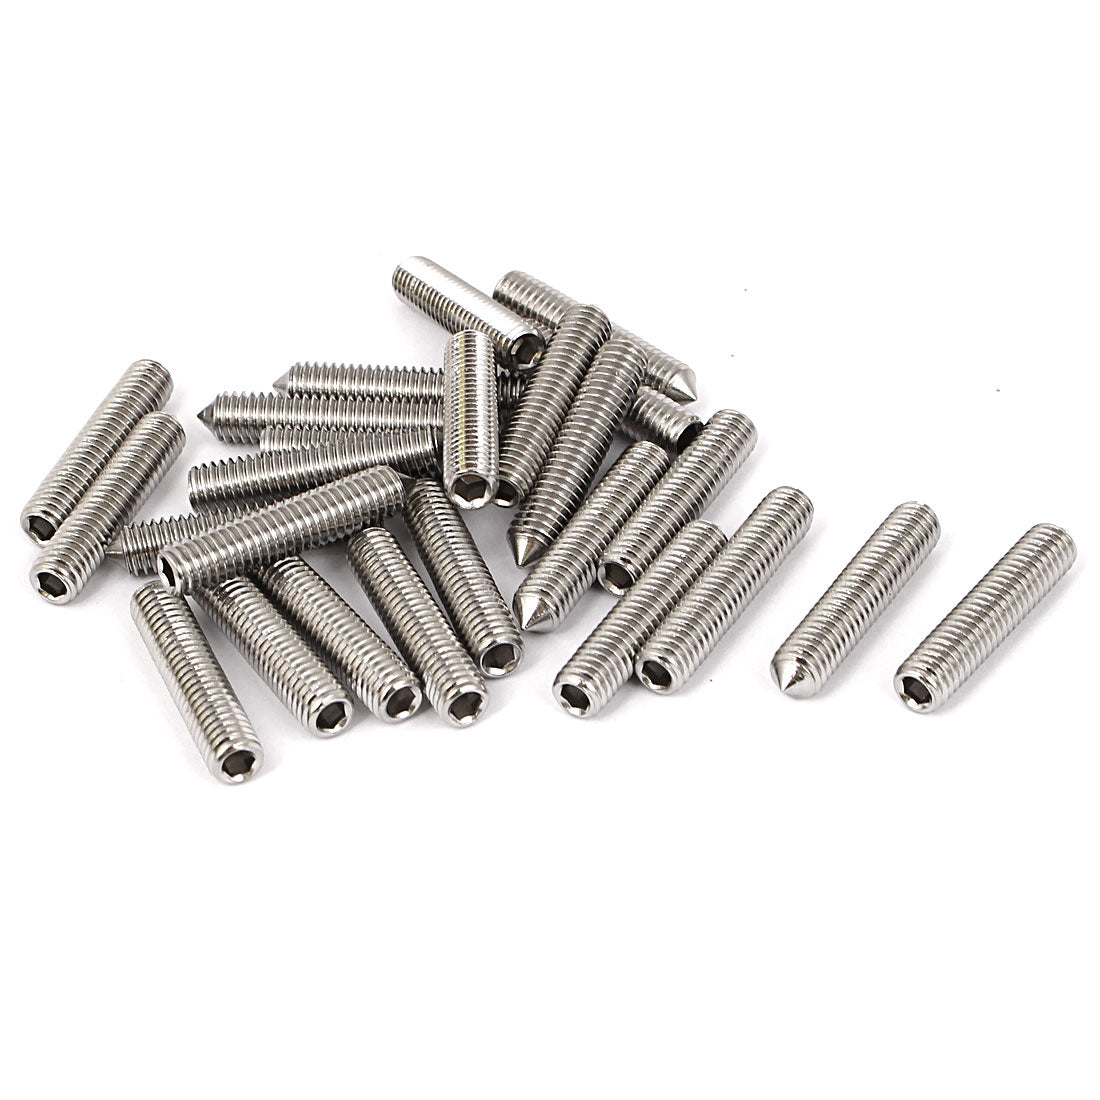 uxcell Uxcell M6x30mm Stainless Steel Cone Point Grub Screws Hex Socket Set Screw 25pcs